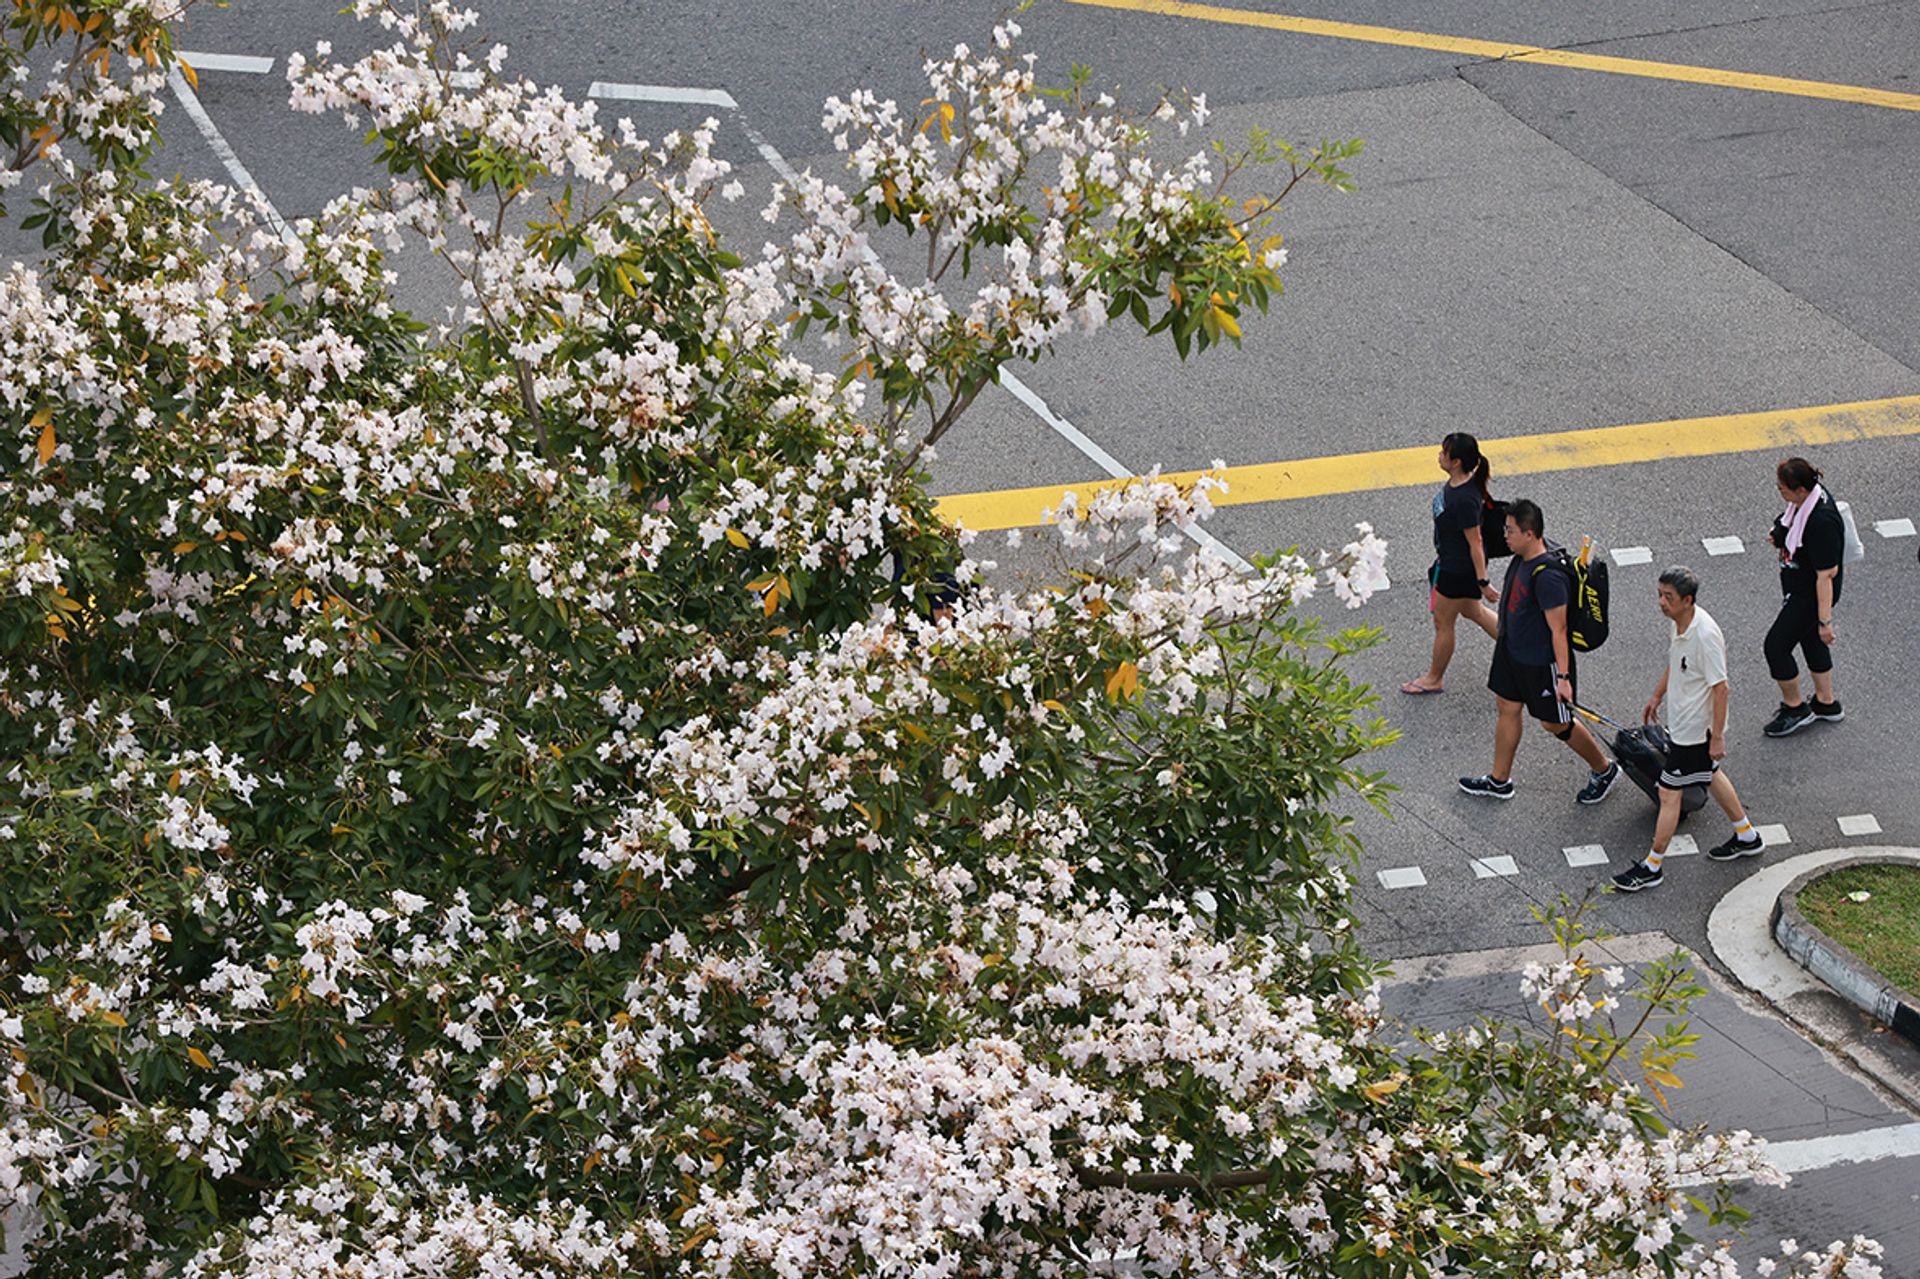 The blooming trees were seen in different parts of the island such as Tessensohn Road on Saturday. ST PHOTO: JASON QUAH